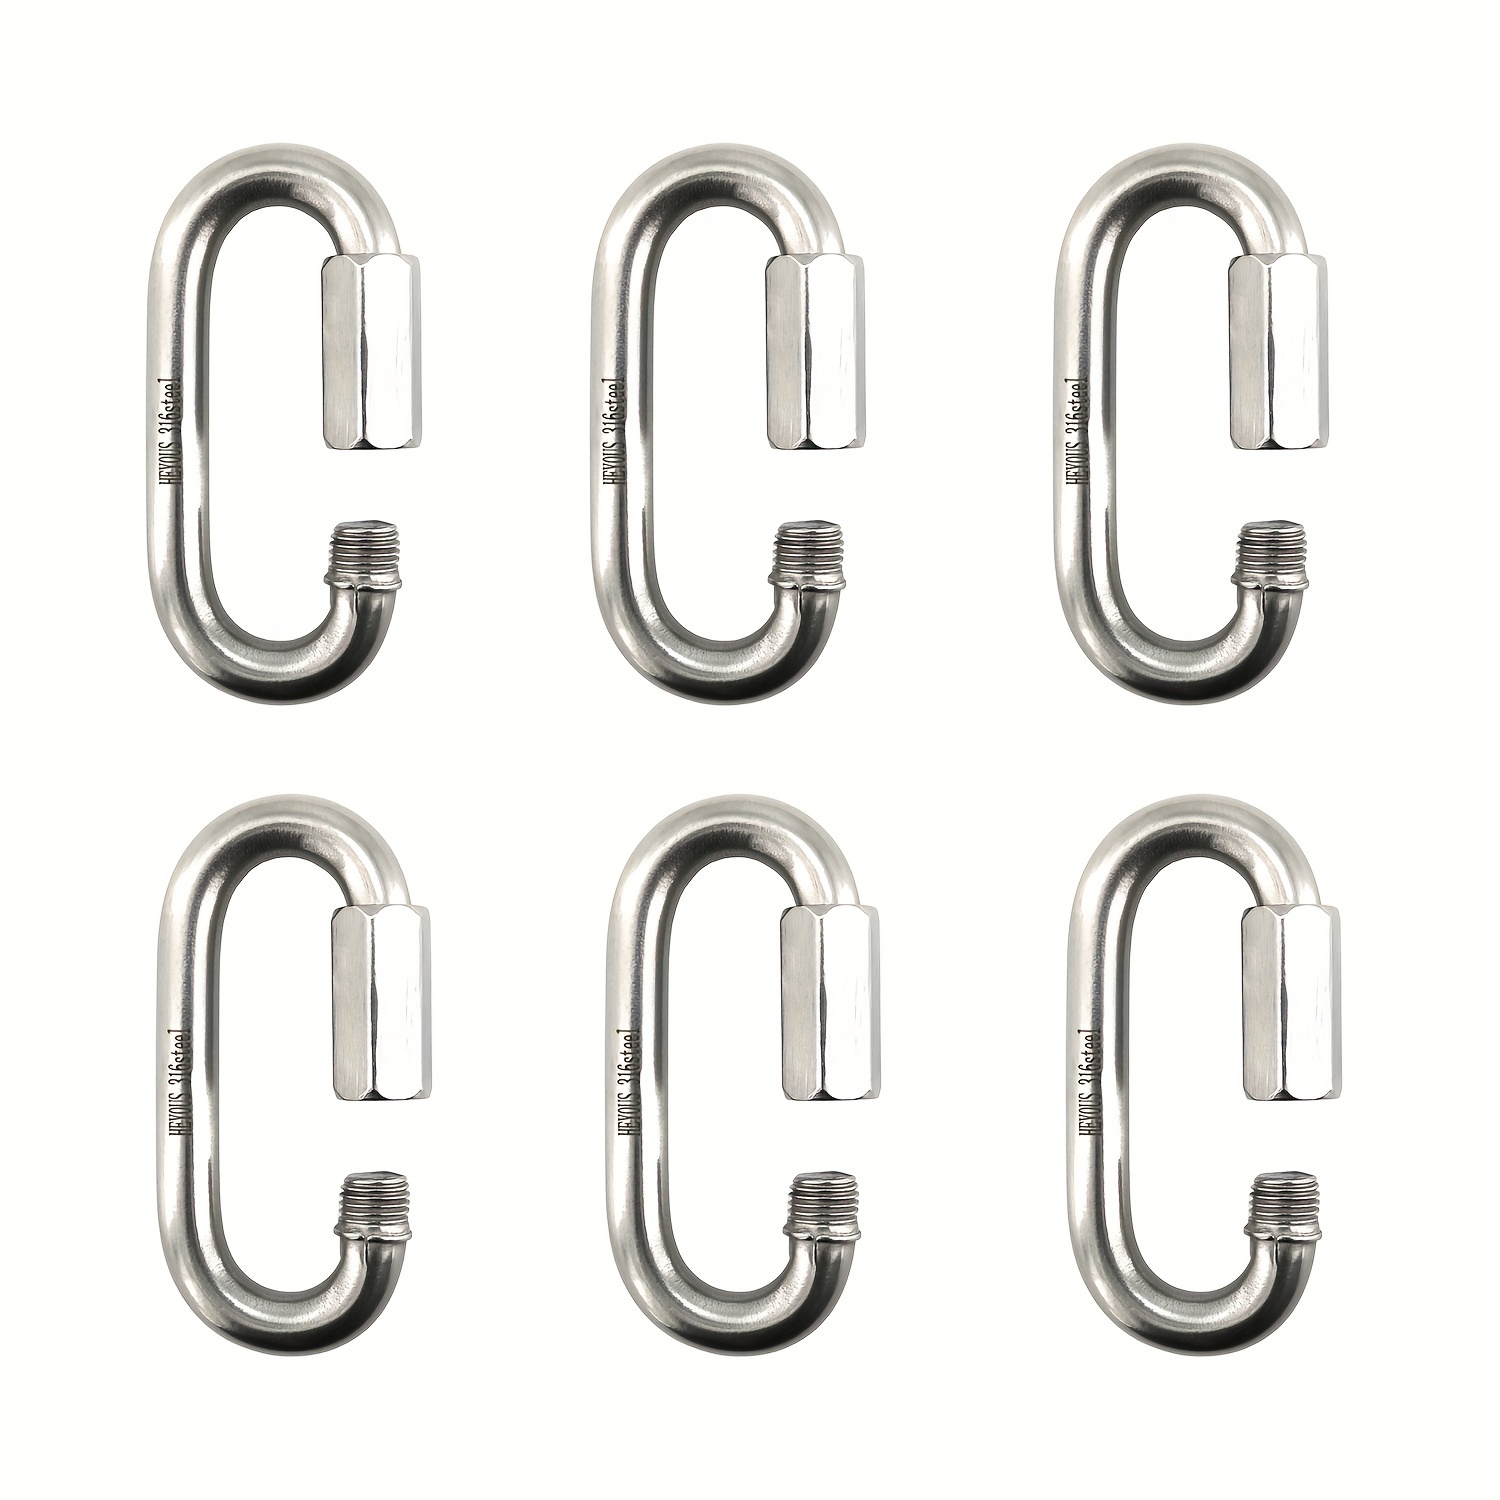 

6pcs M6 Stainless Steel 316 Carabiner 1/4 Inch Carabiner M6 Quick Links Chain Connector Heavy Duty Chain Locking Carabiner